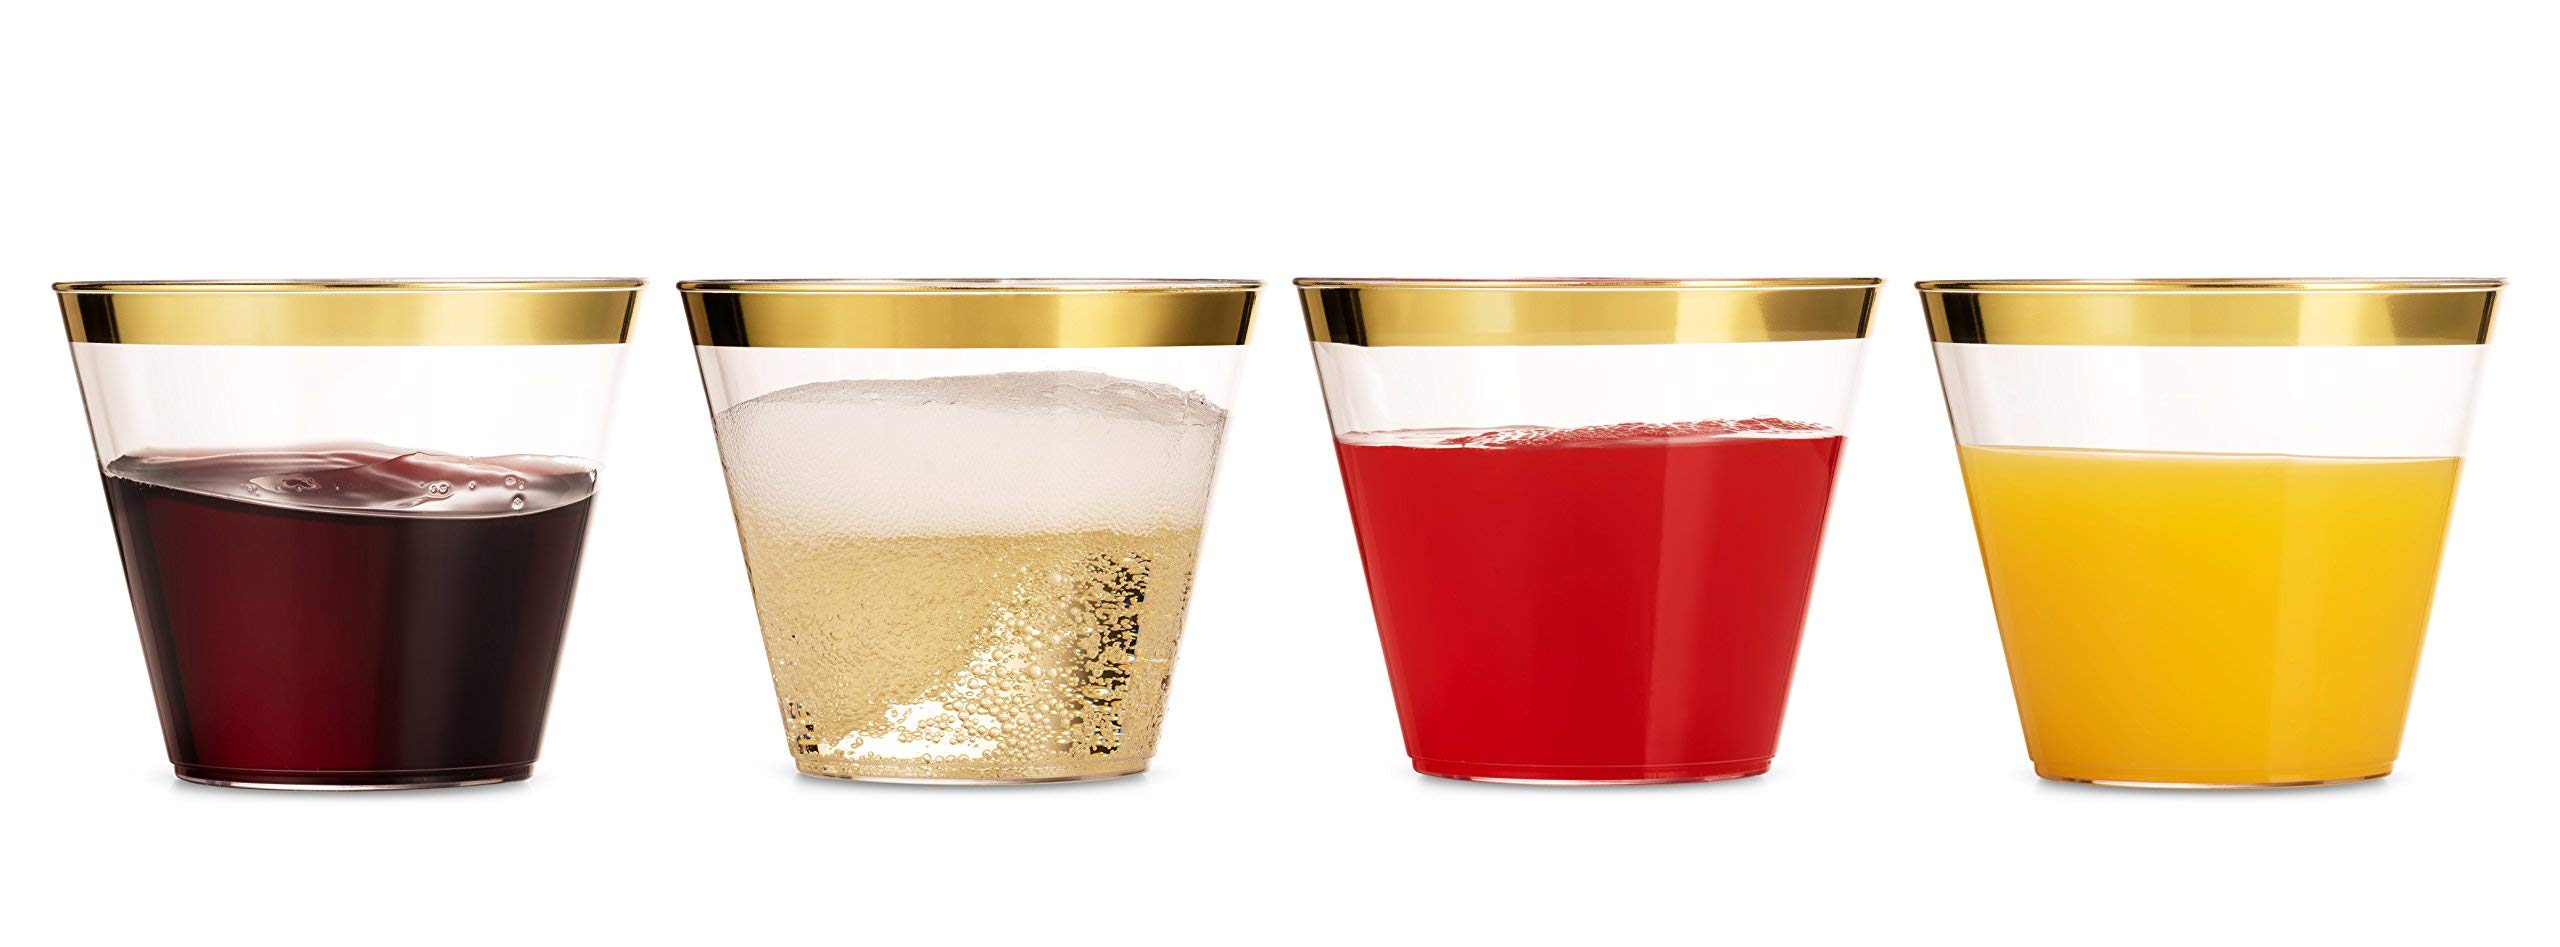 Munfix 100 Gold Plastic Cups 9 Oz Clear Plastic Cups Old Fashioned Tumblers Gold Rimmed Cups Fancy Disposable Wedding Cups Elegant Party Cups with Gold Rim